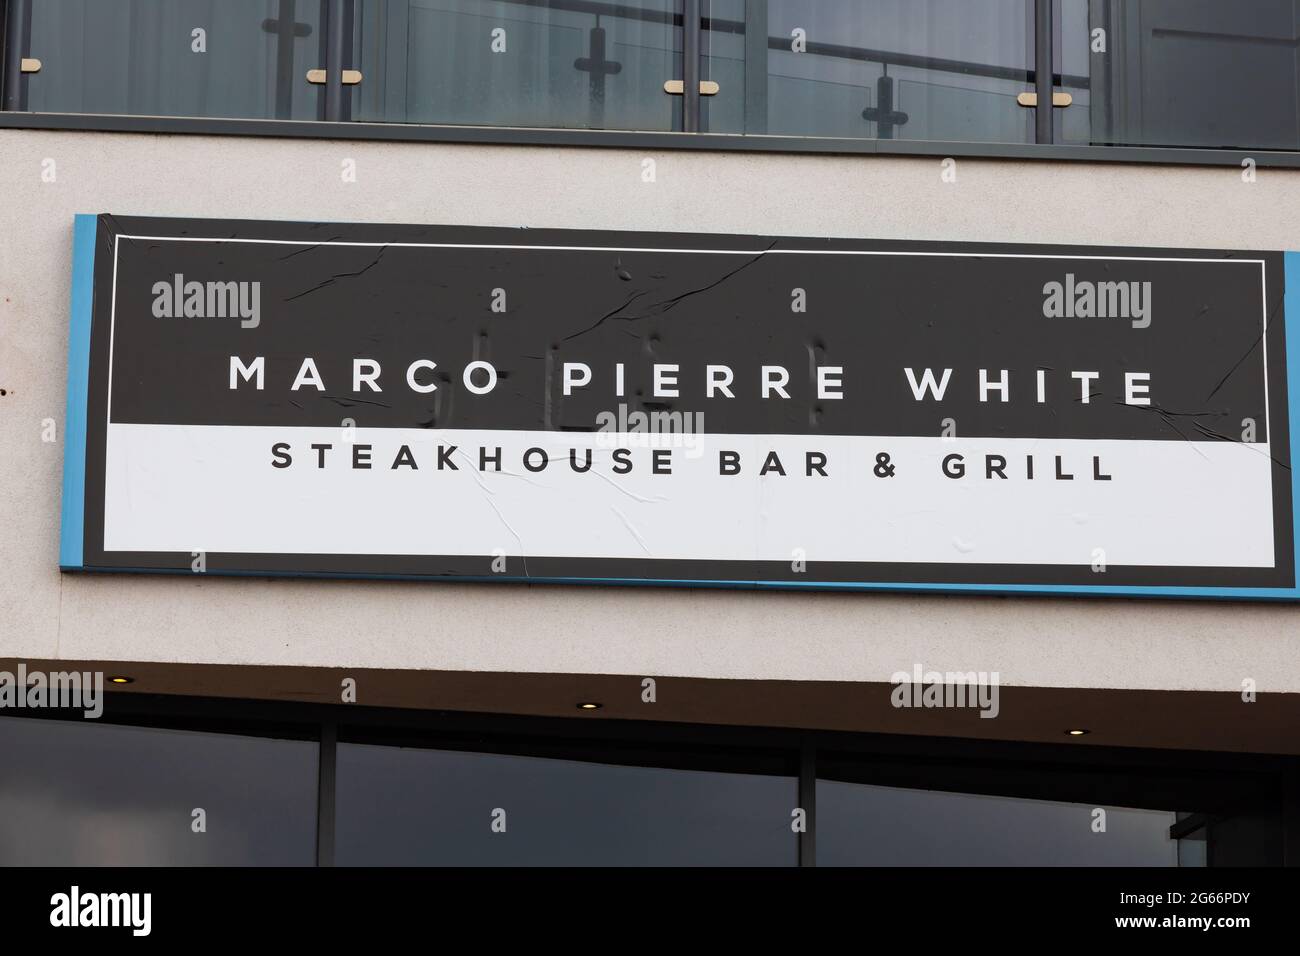 Marco Pierre White Steakhouse Bar & Grill sign. Brayford Pool, Lincoln, Lincolnshire, England Stock Photo